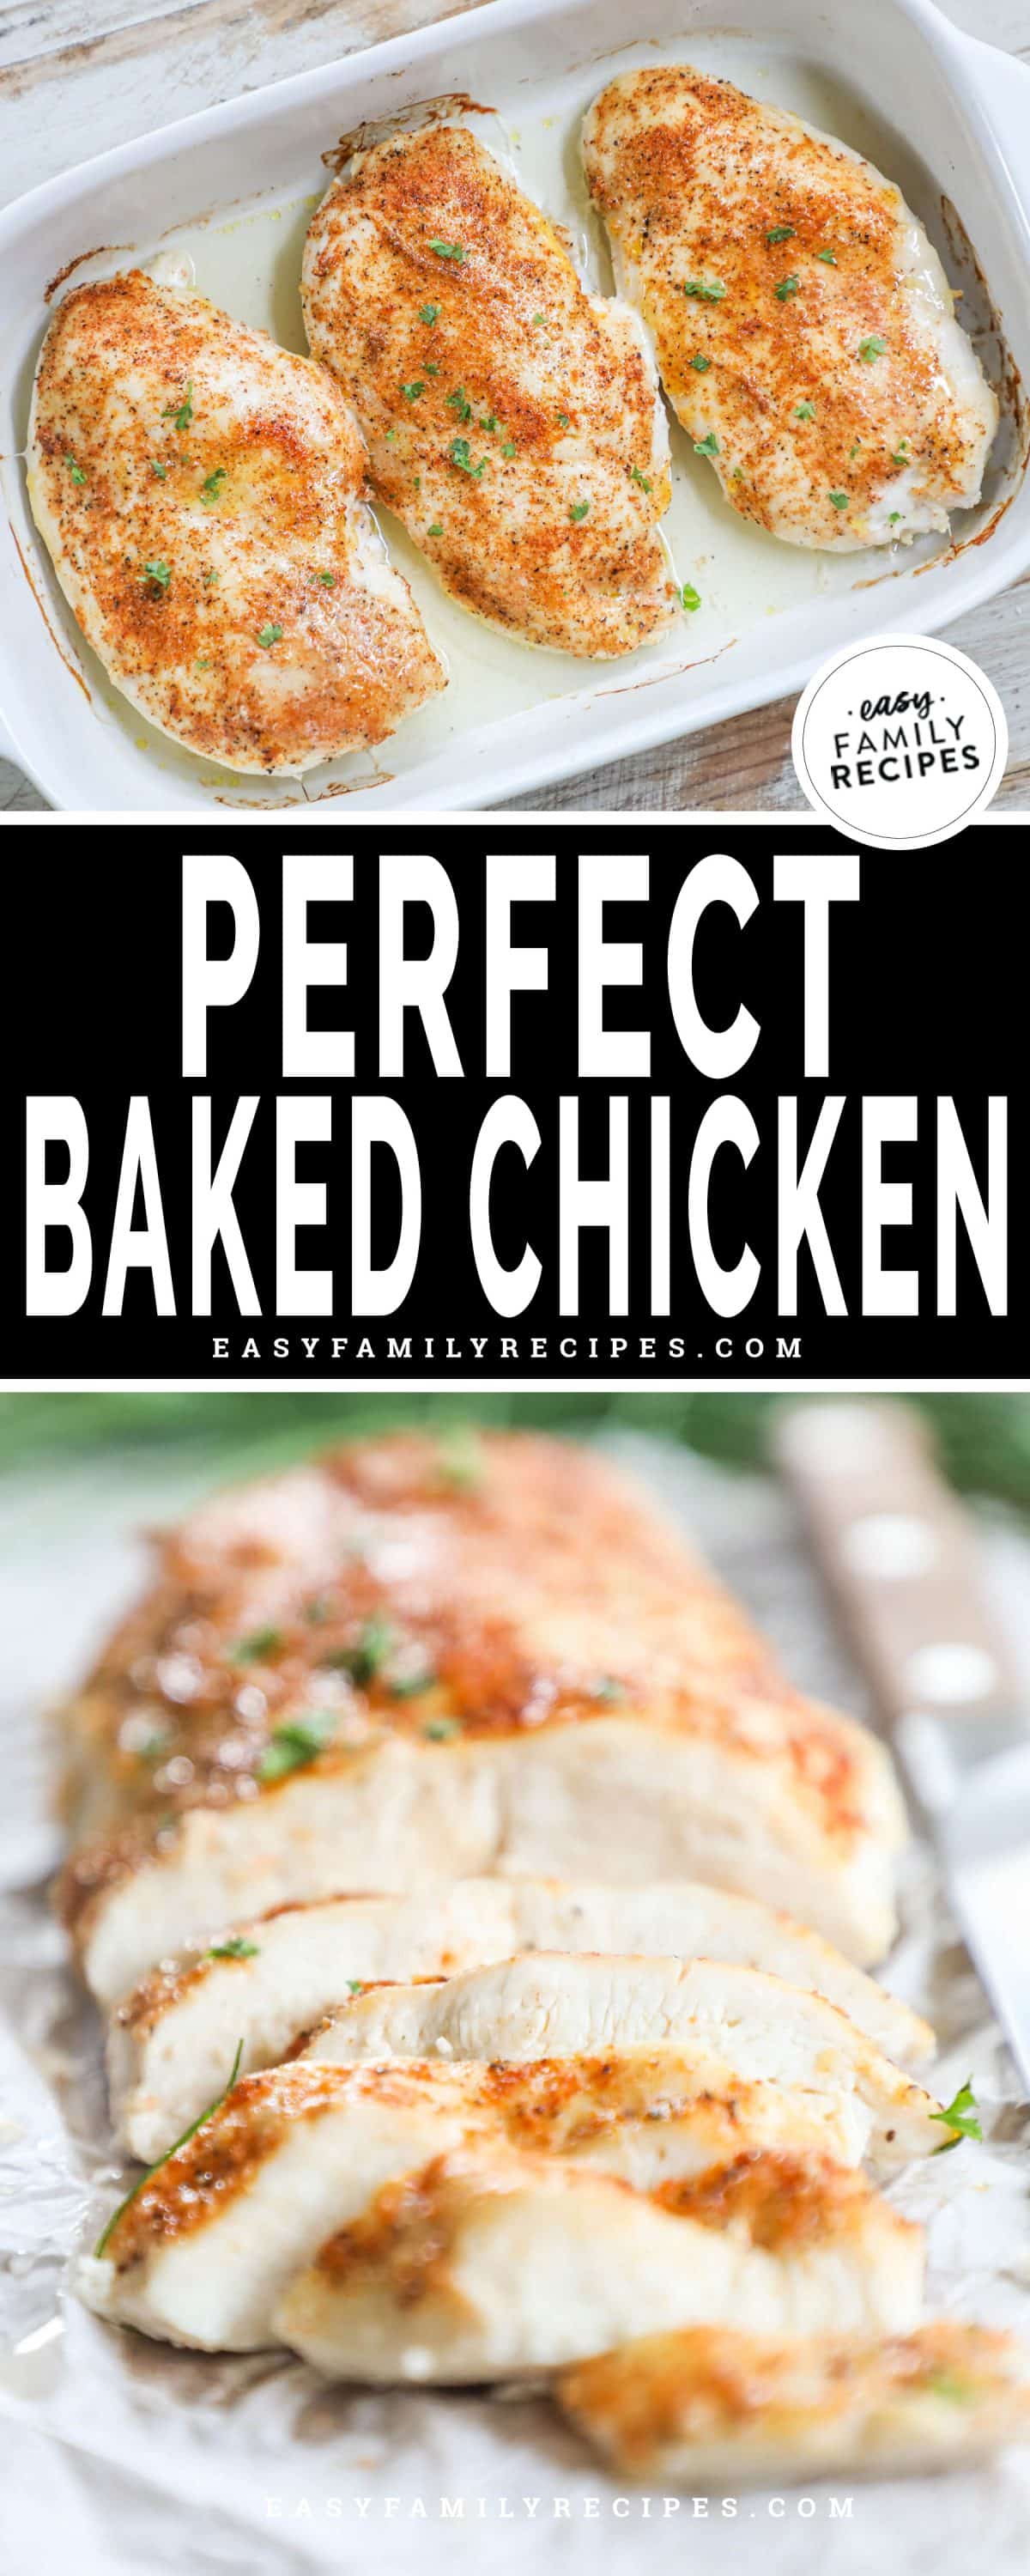 Two photos with text in the middle reading "Perfect Baked Chicken" Top chicken breast in baking dish, bottom chicken breast sliced and ready to eat